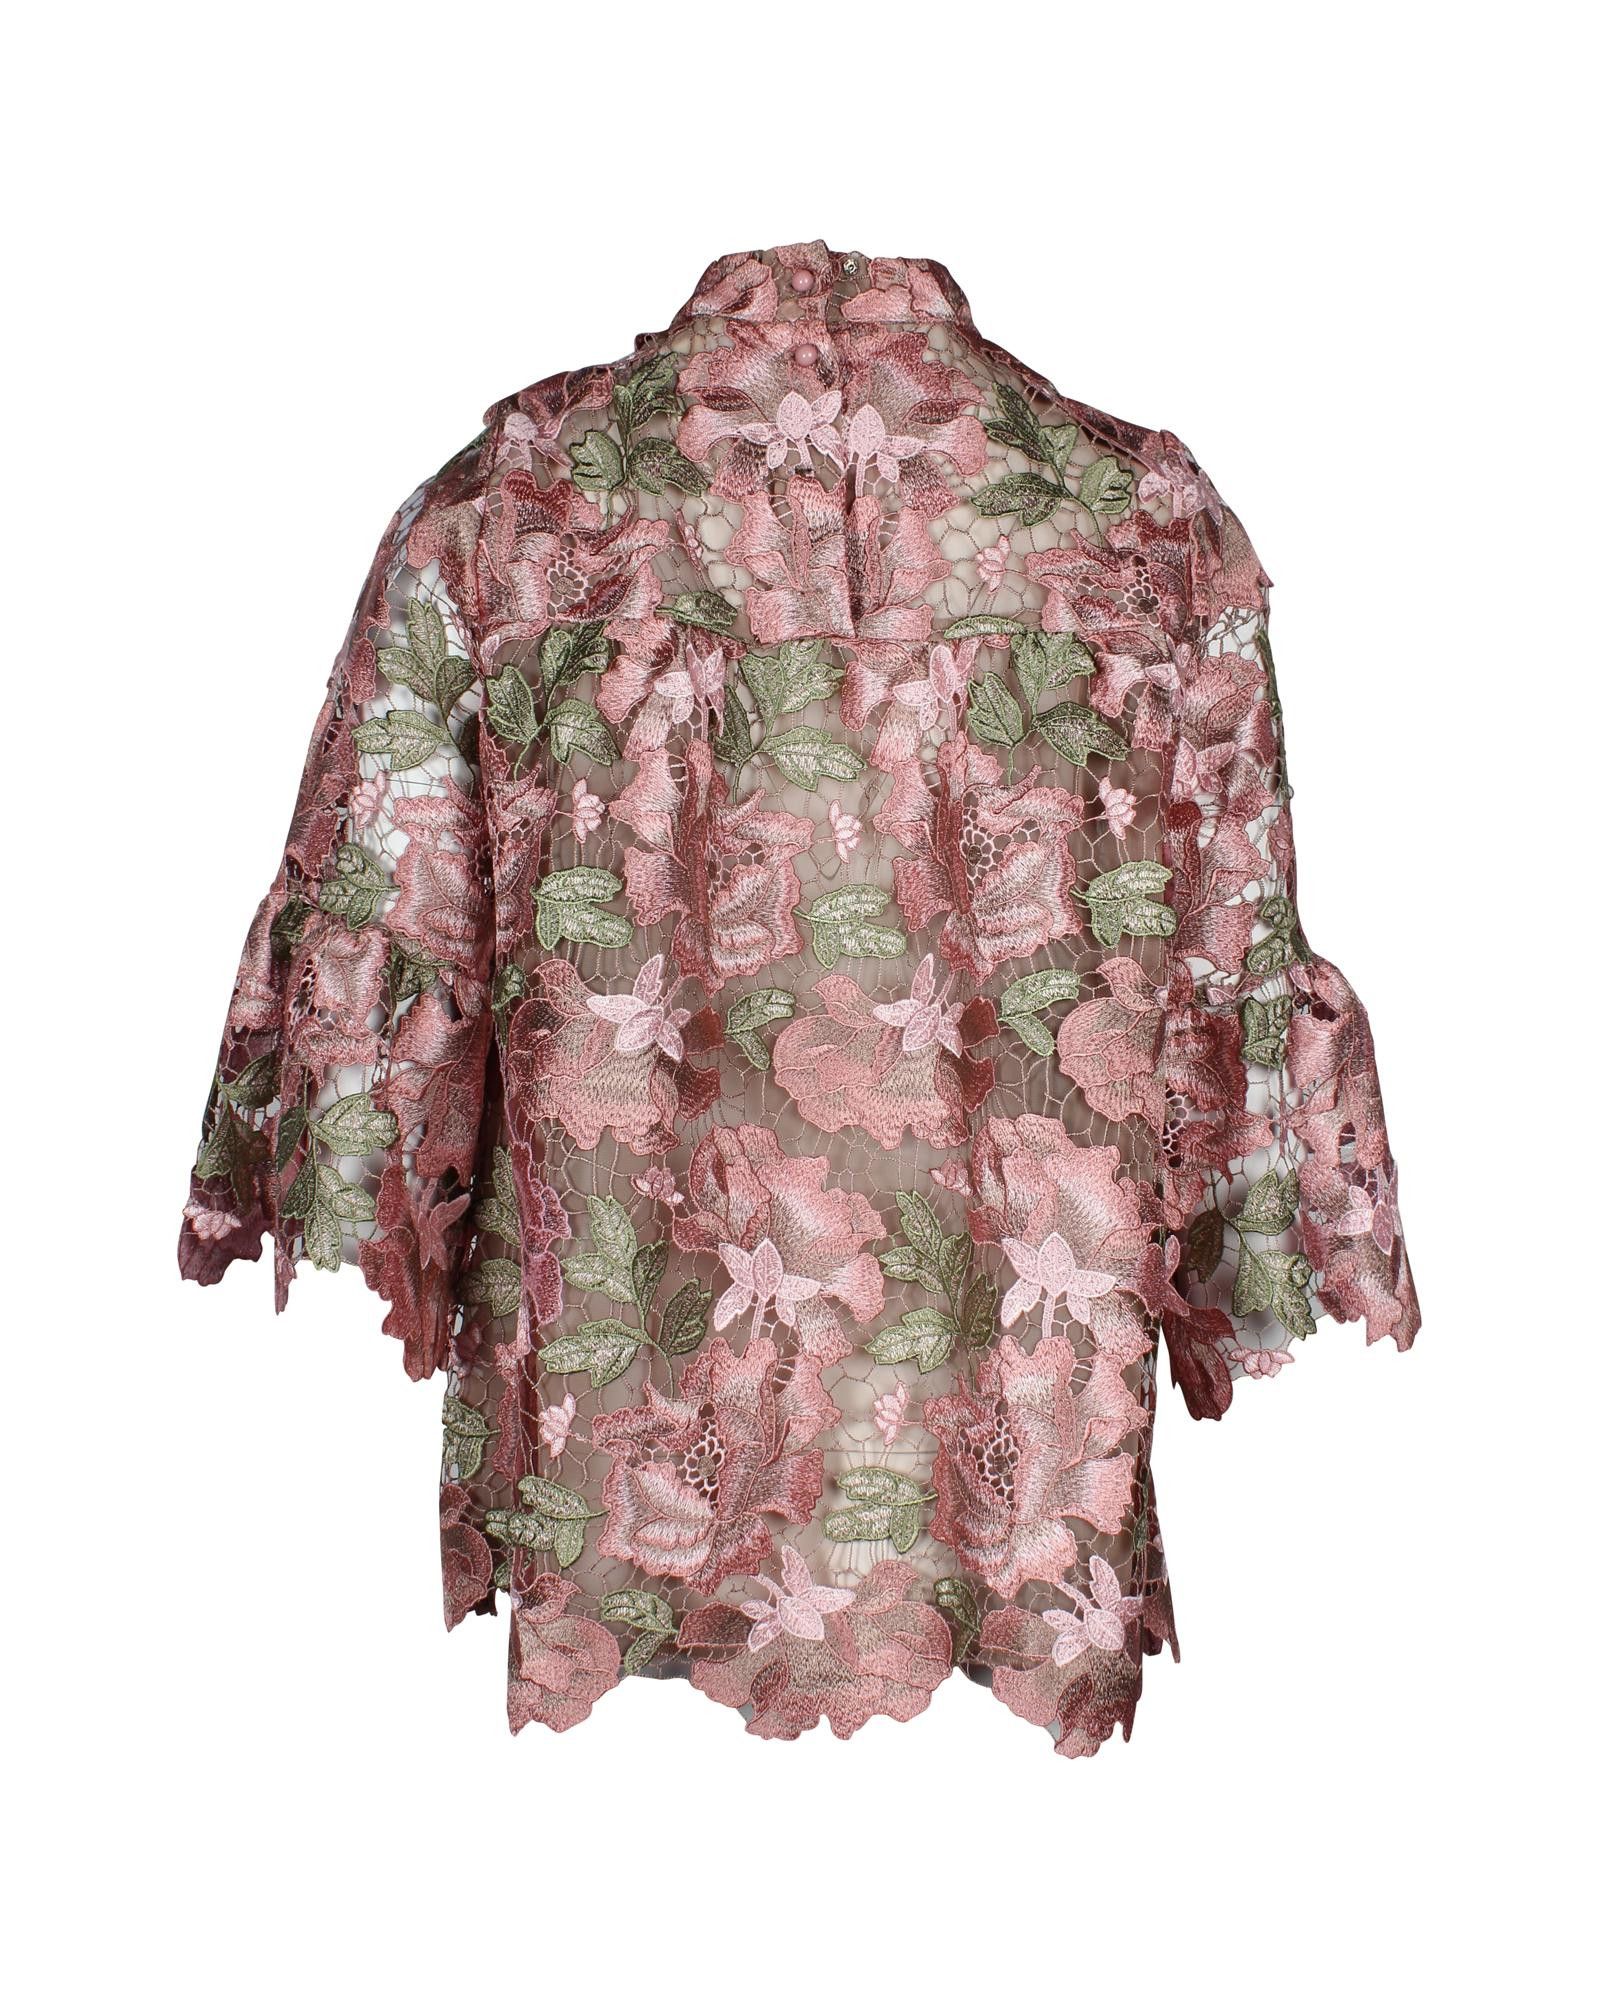 Anna Sui Floral Lace Mock Neck Blouse in Pink Polyester Size XS / US 0-2 / IT 36-38 - 2 Preview